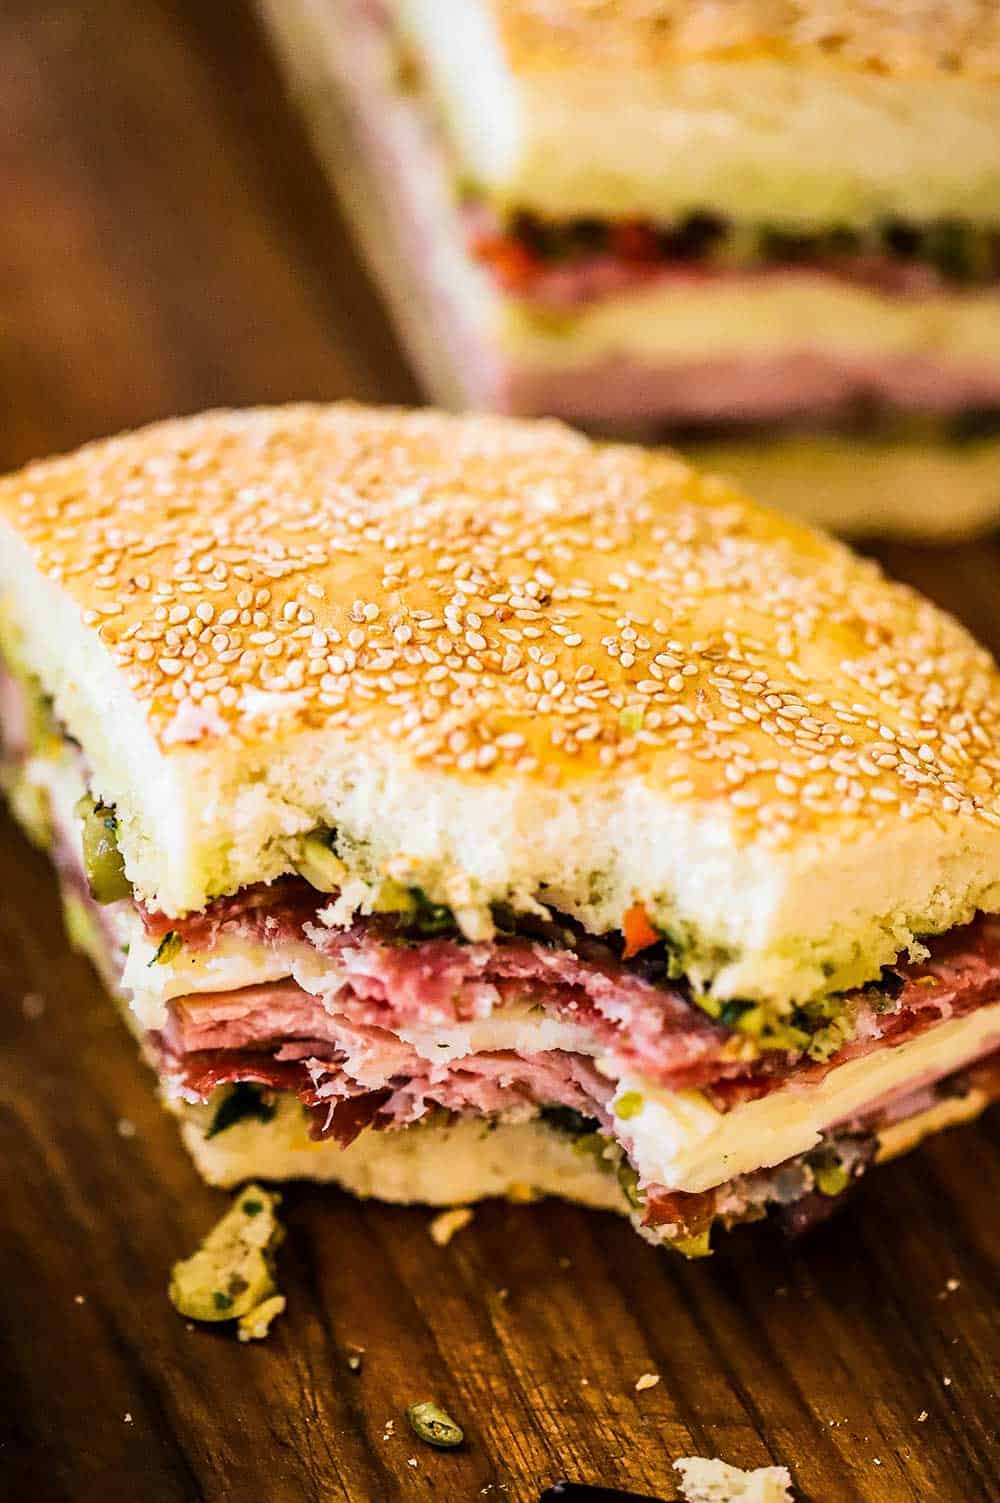 A quarter slice of a muffuletta sandwich with a bite taken out of it.